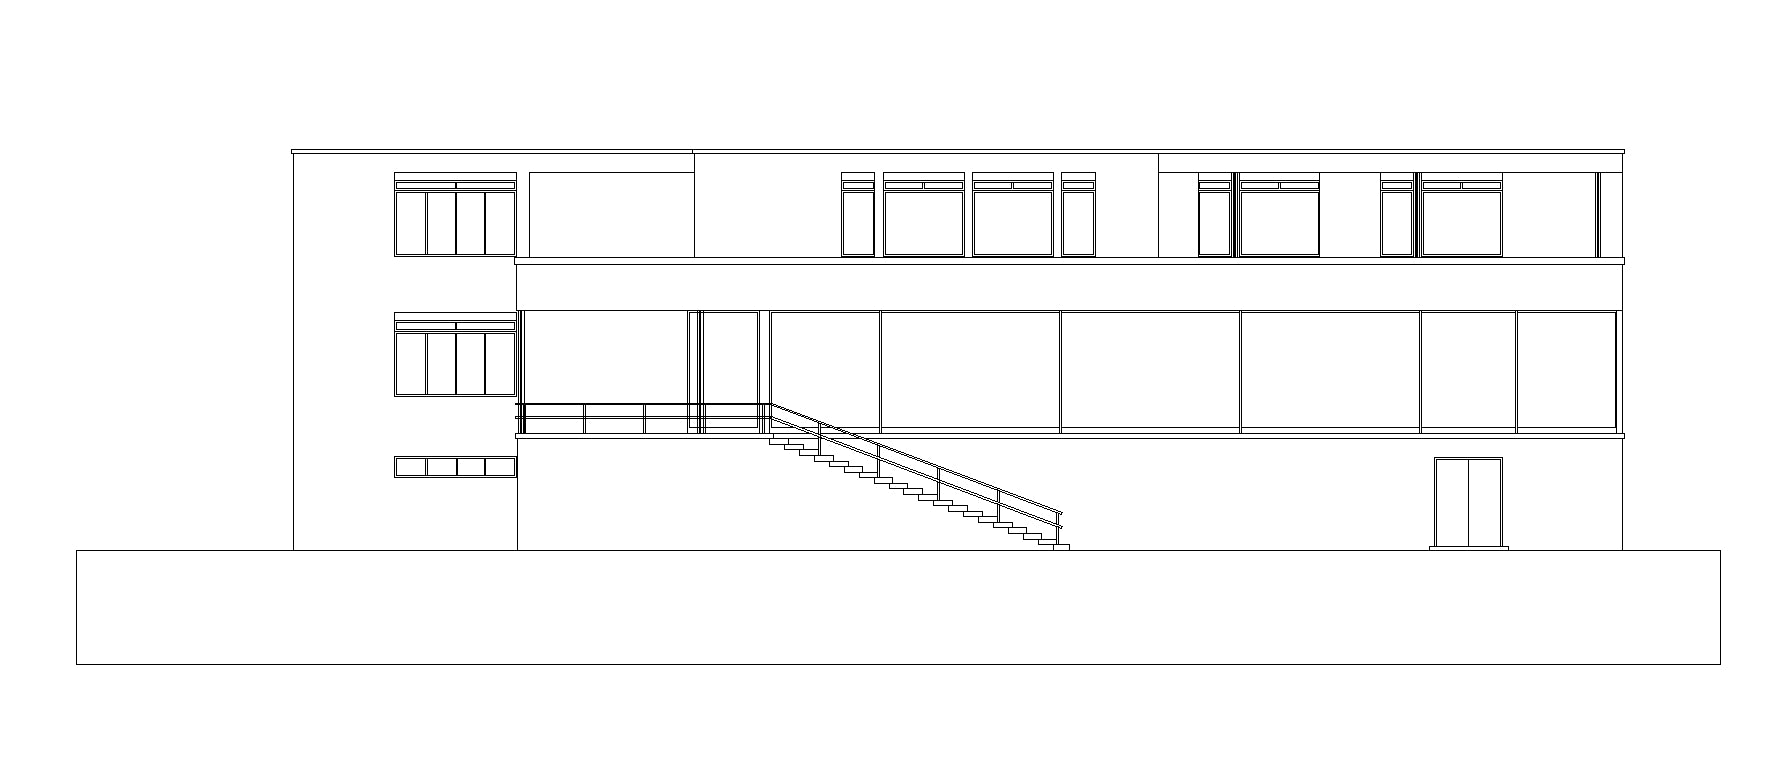 【Famous Architecture Project】Tugendhat Villa-Ludwig Mies van der Rohe-CAD Drawings